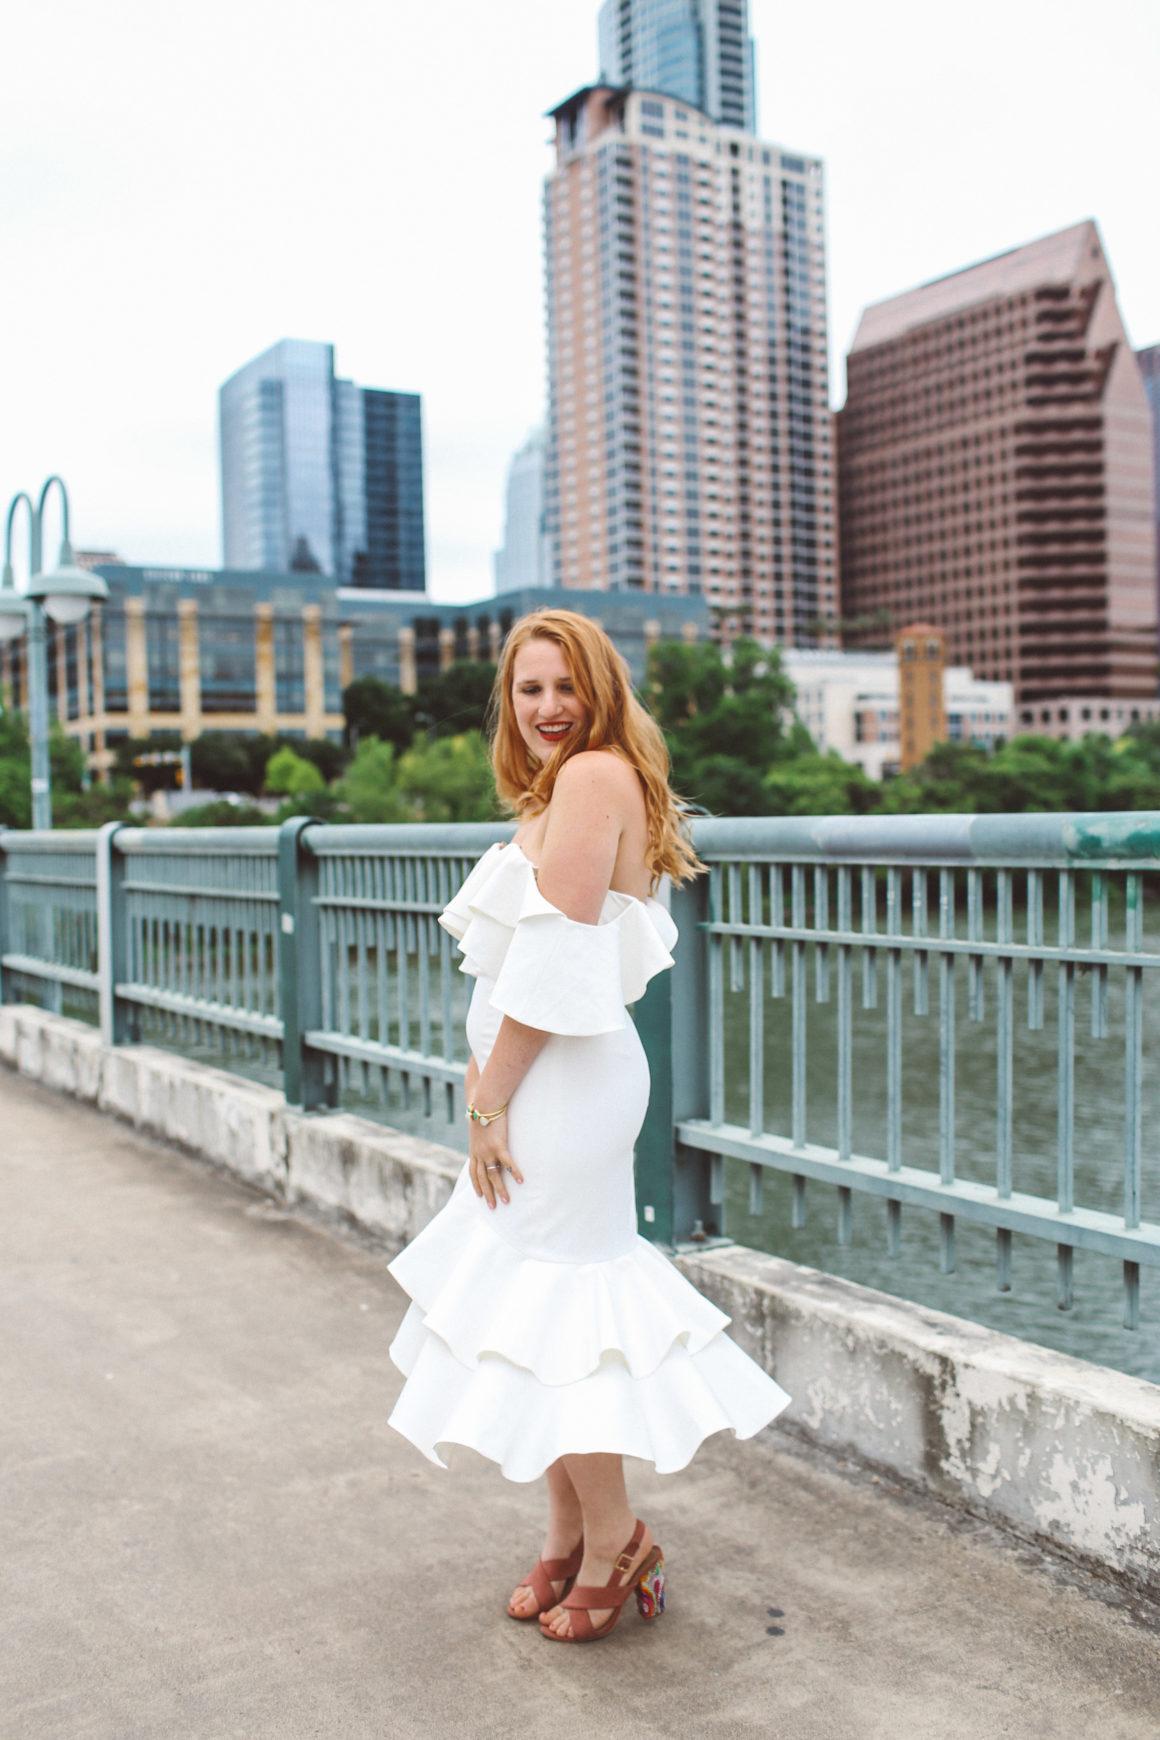 My REAL Austin Texas Bachelorette Party Guide (Where To Stay, Eat